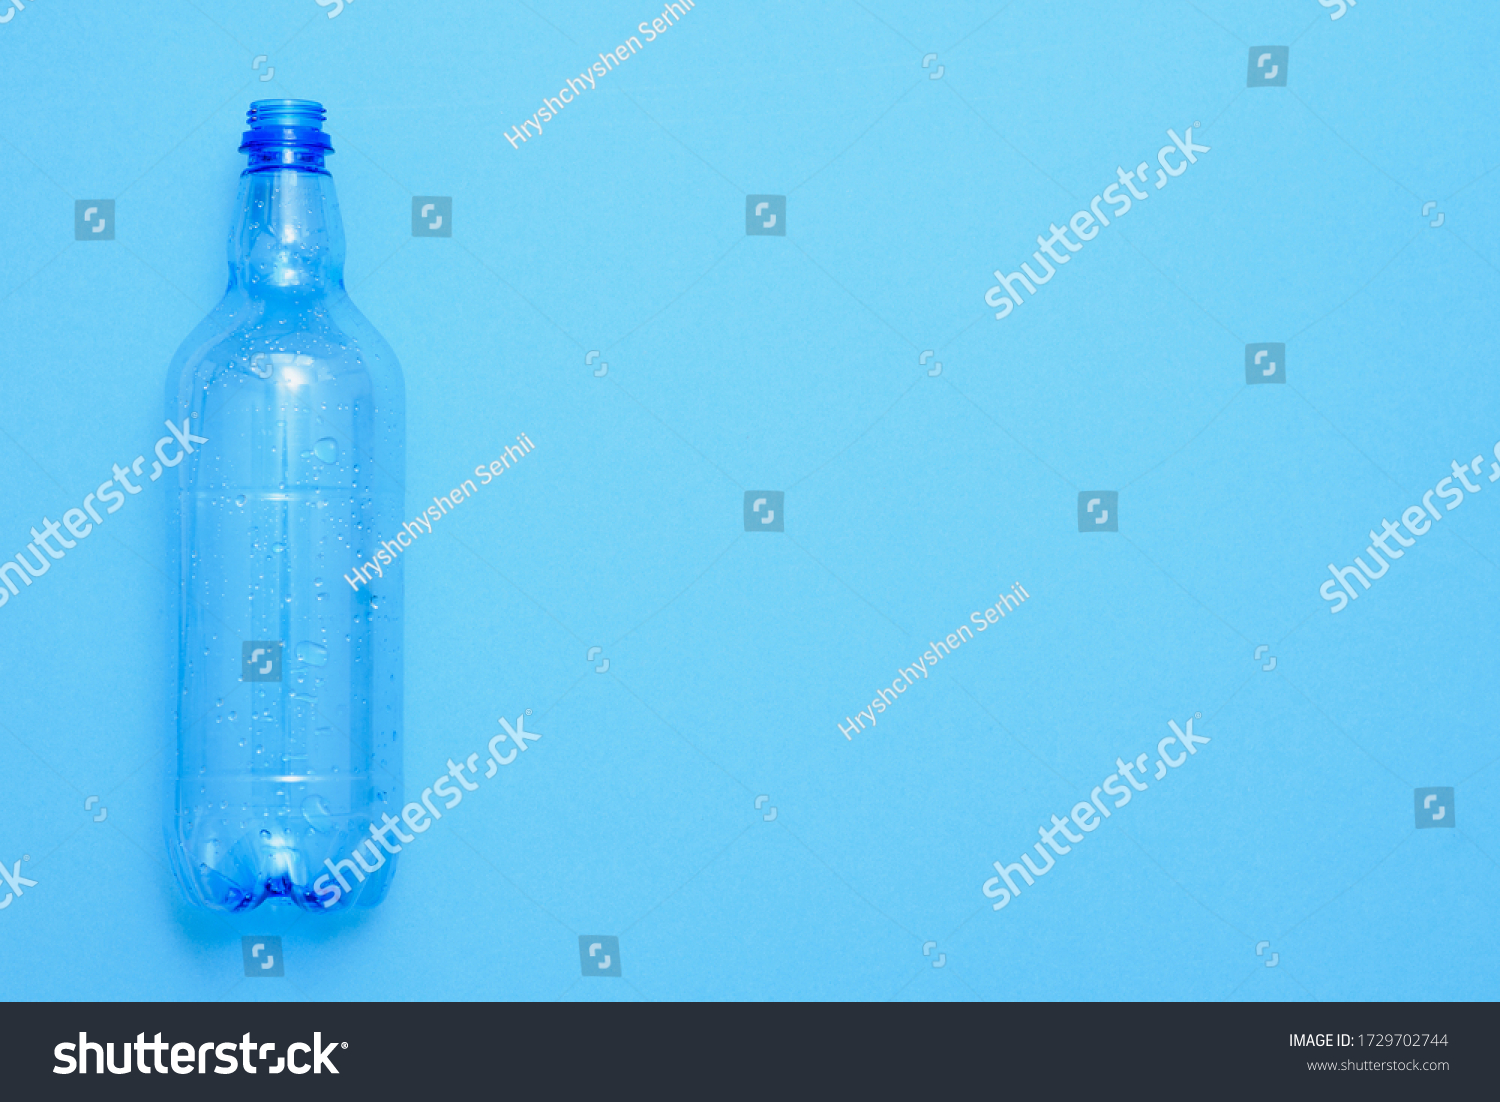 Used plastic bottles on the blue background. Recycling concept #1729702744